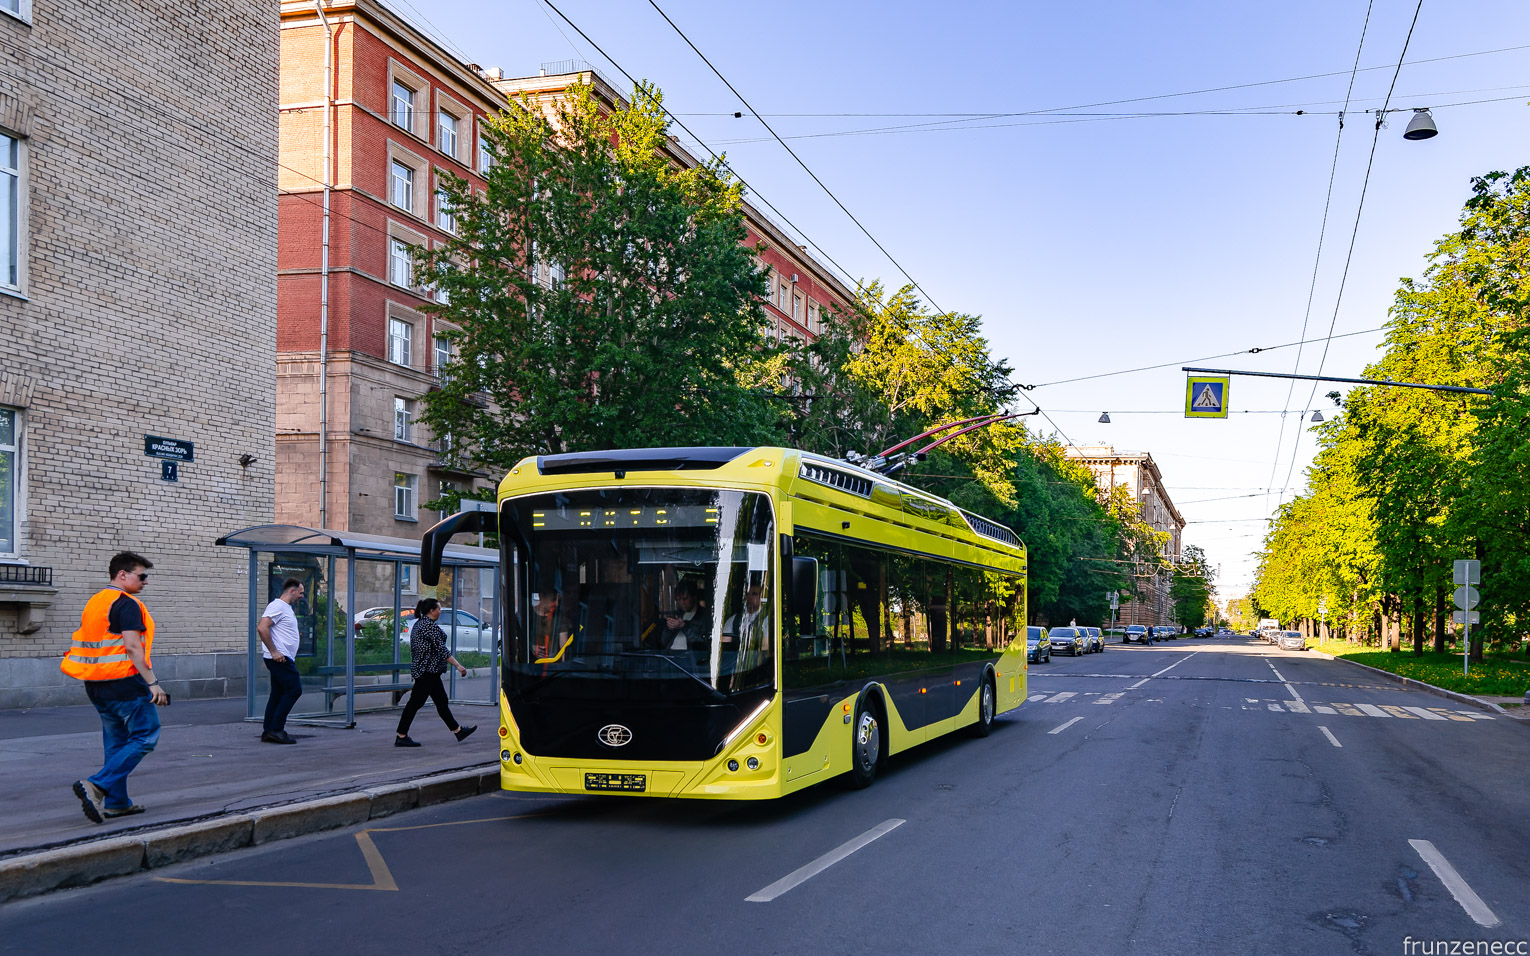 Engels, PKTS-62181 "General" č. Б/н-1; Saint-Petersburg — Running-in of the PKTS-62181 "General" electric bus in the city — 05/20/2023 — 05/21/2023